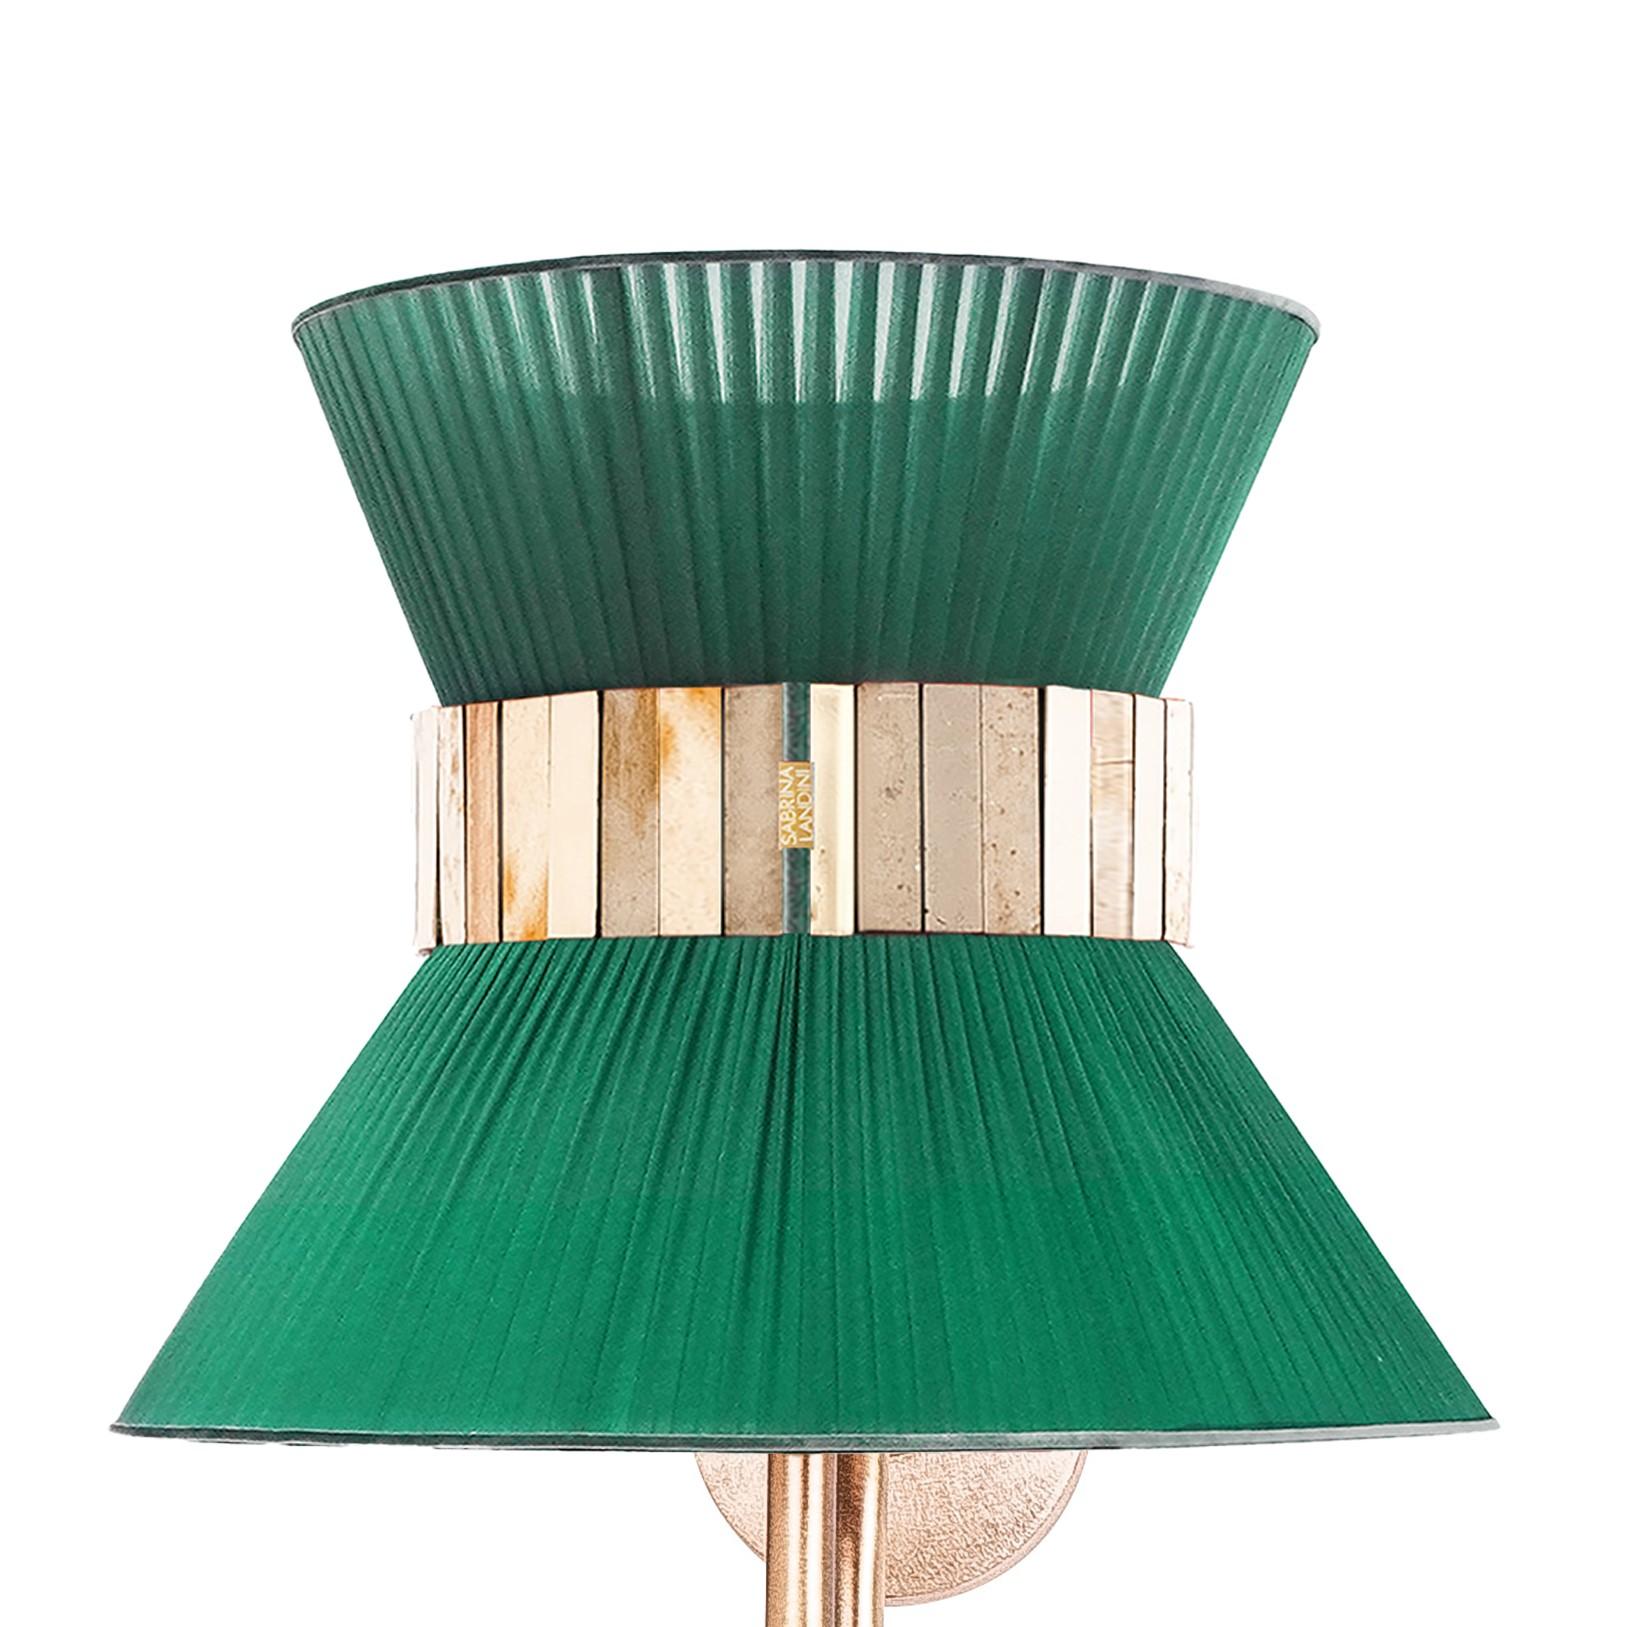 TIFFANY the iconic lamp!

Tiffany, a timeless lamp, inspired by the international movie “Breakfast at Tiffany” and the talented character Audrey Hepburn, is a contemporary lamp, entirely made in Tuscany, Italy and 100% of Italian origin.

Thanks to